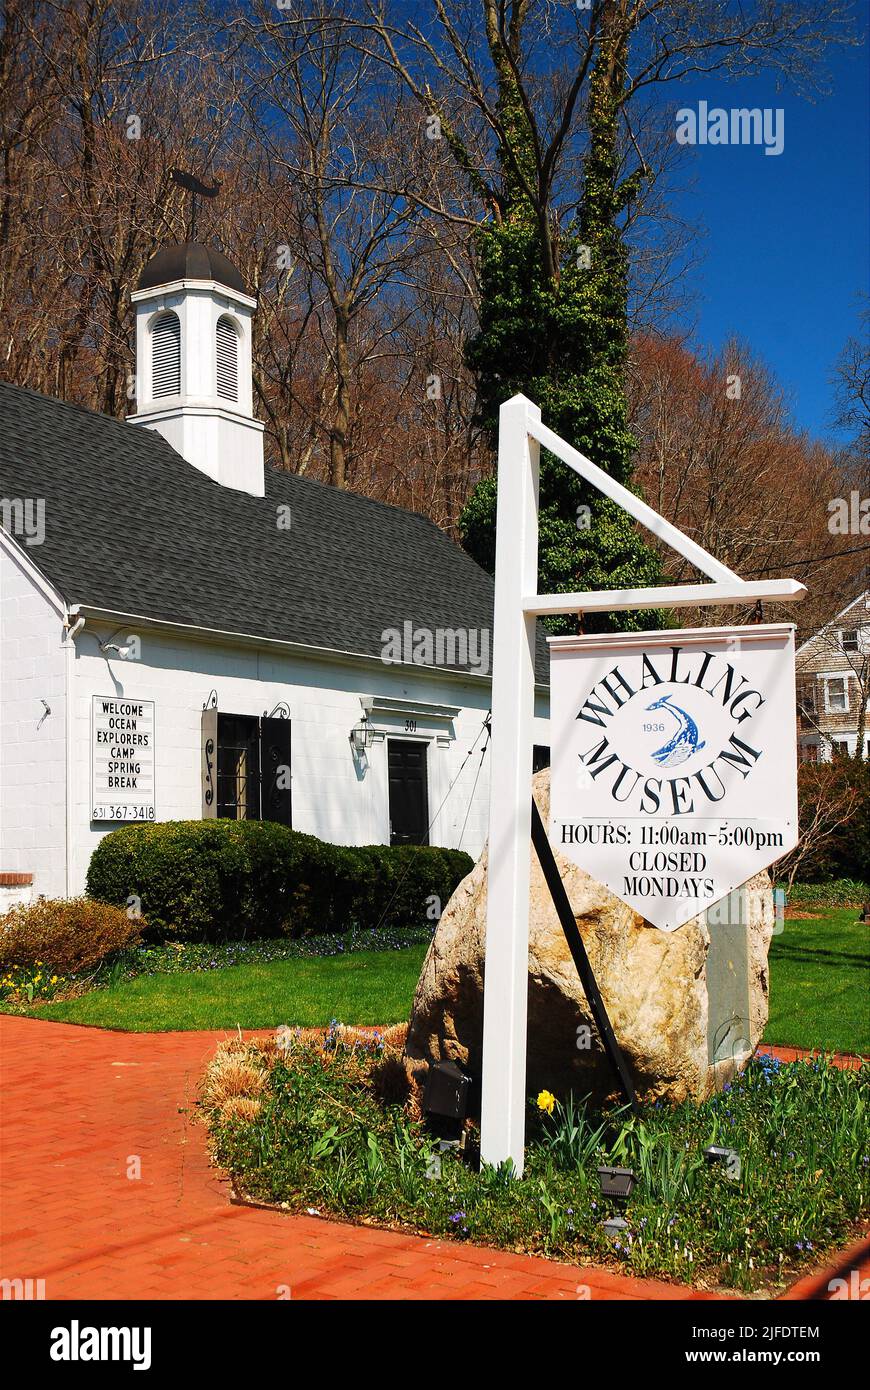 The Whaling Museum of Cold Spring Harbor showcases the history of the whaling industry in the town  and on Long Island Stock Photo